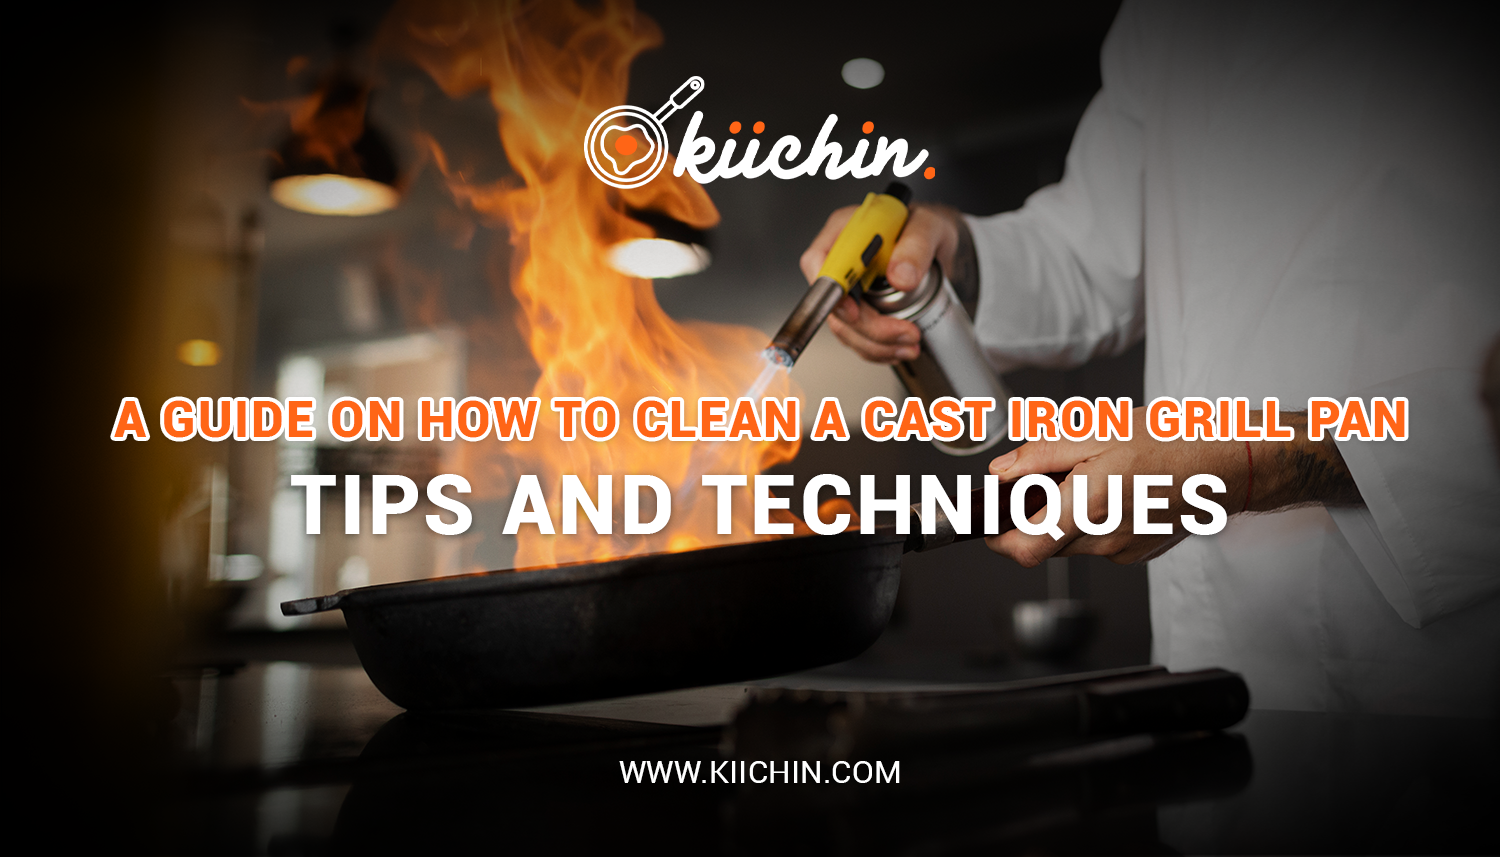 A Guide On How To Clean A Cast Iron Grill Pan: Tips And Techniques